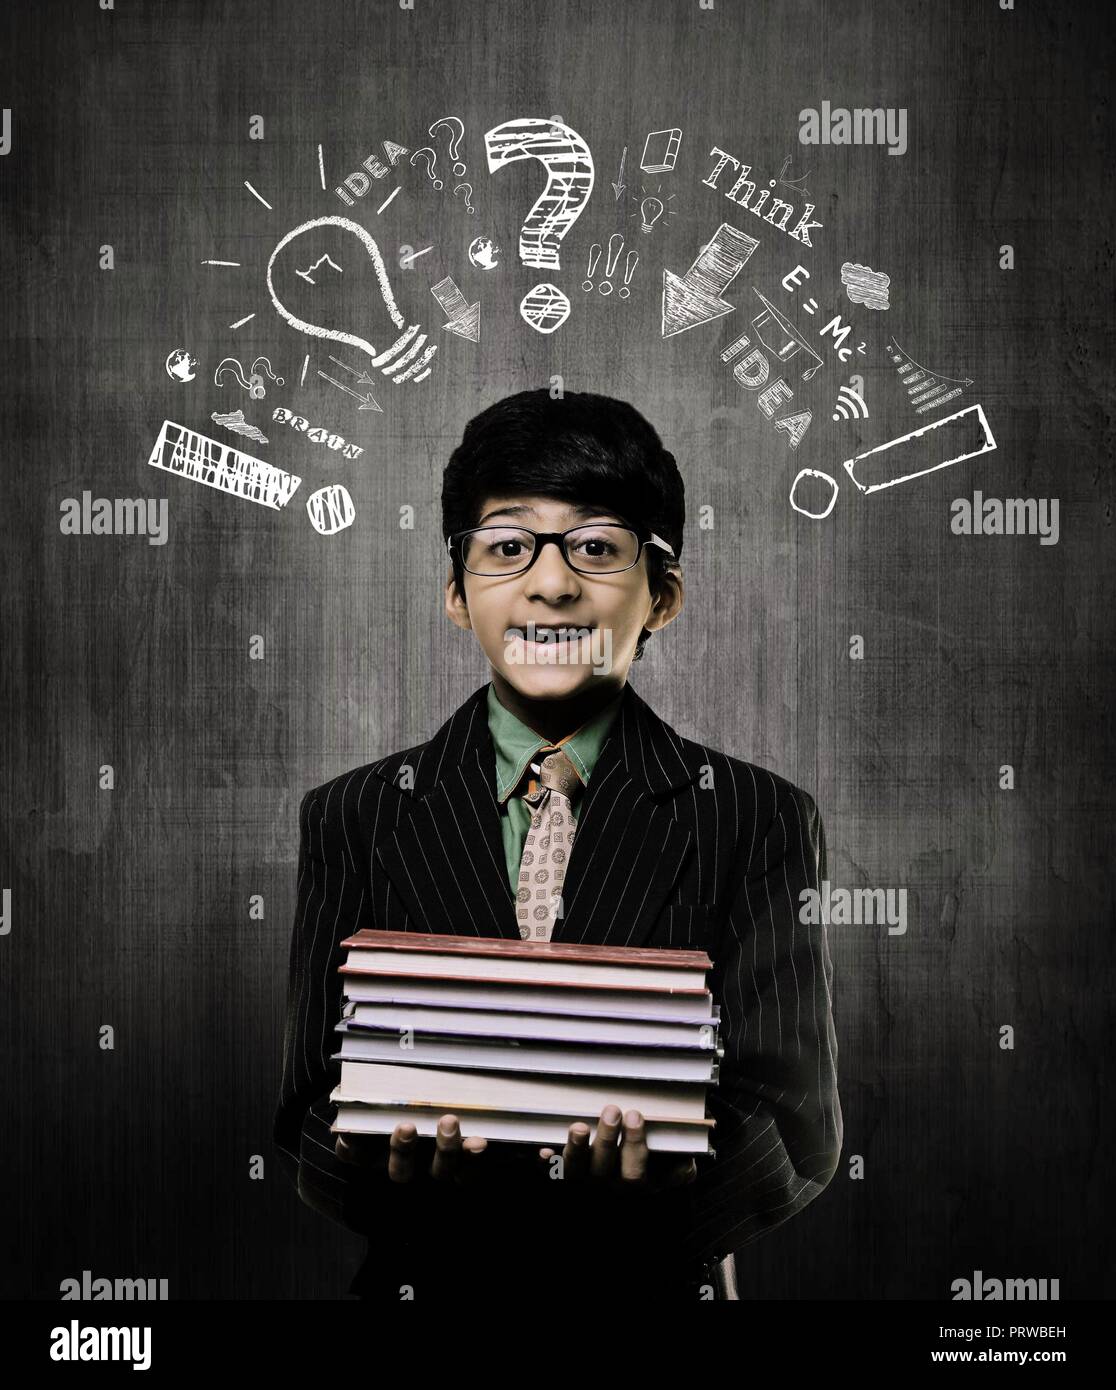 Cute Intelligent Little Boy Holding Books And Wearing Glasses, Smiling While Standing Before A Chalkboard, Thinking Process Elements Drawn Above His H Stock Photo